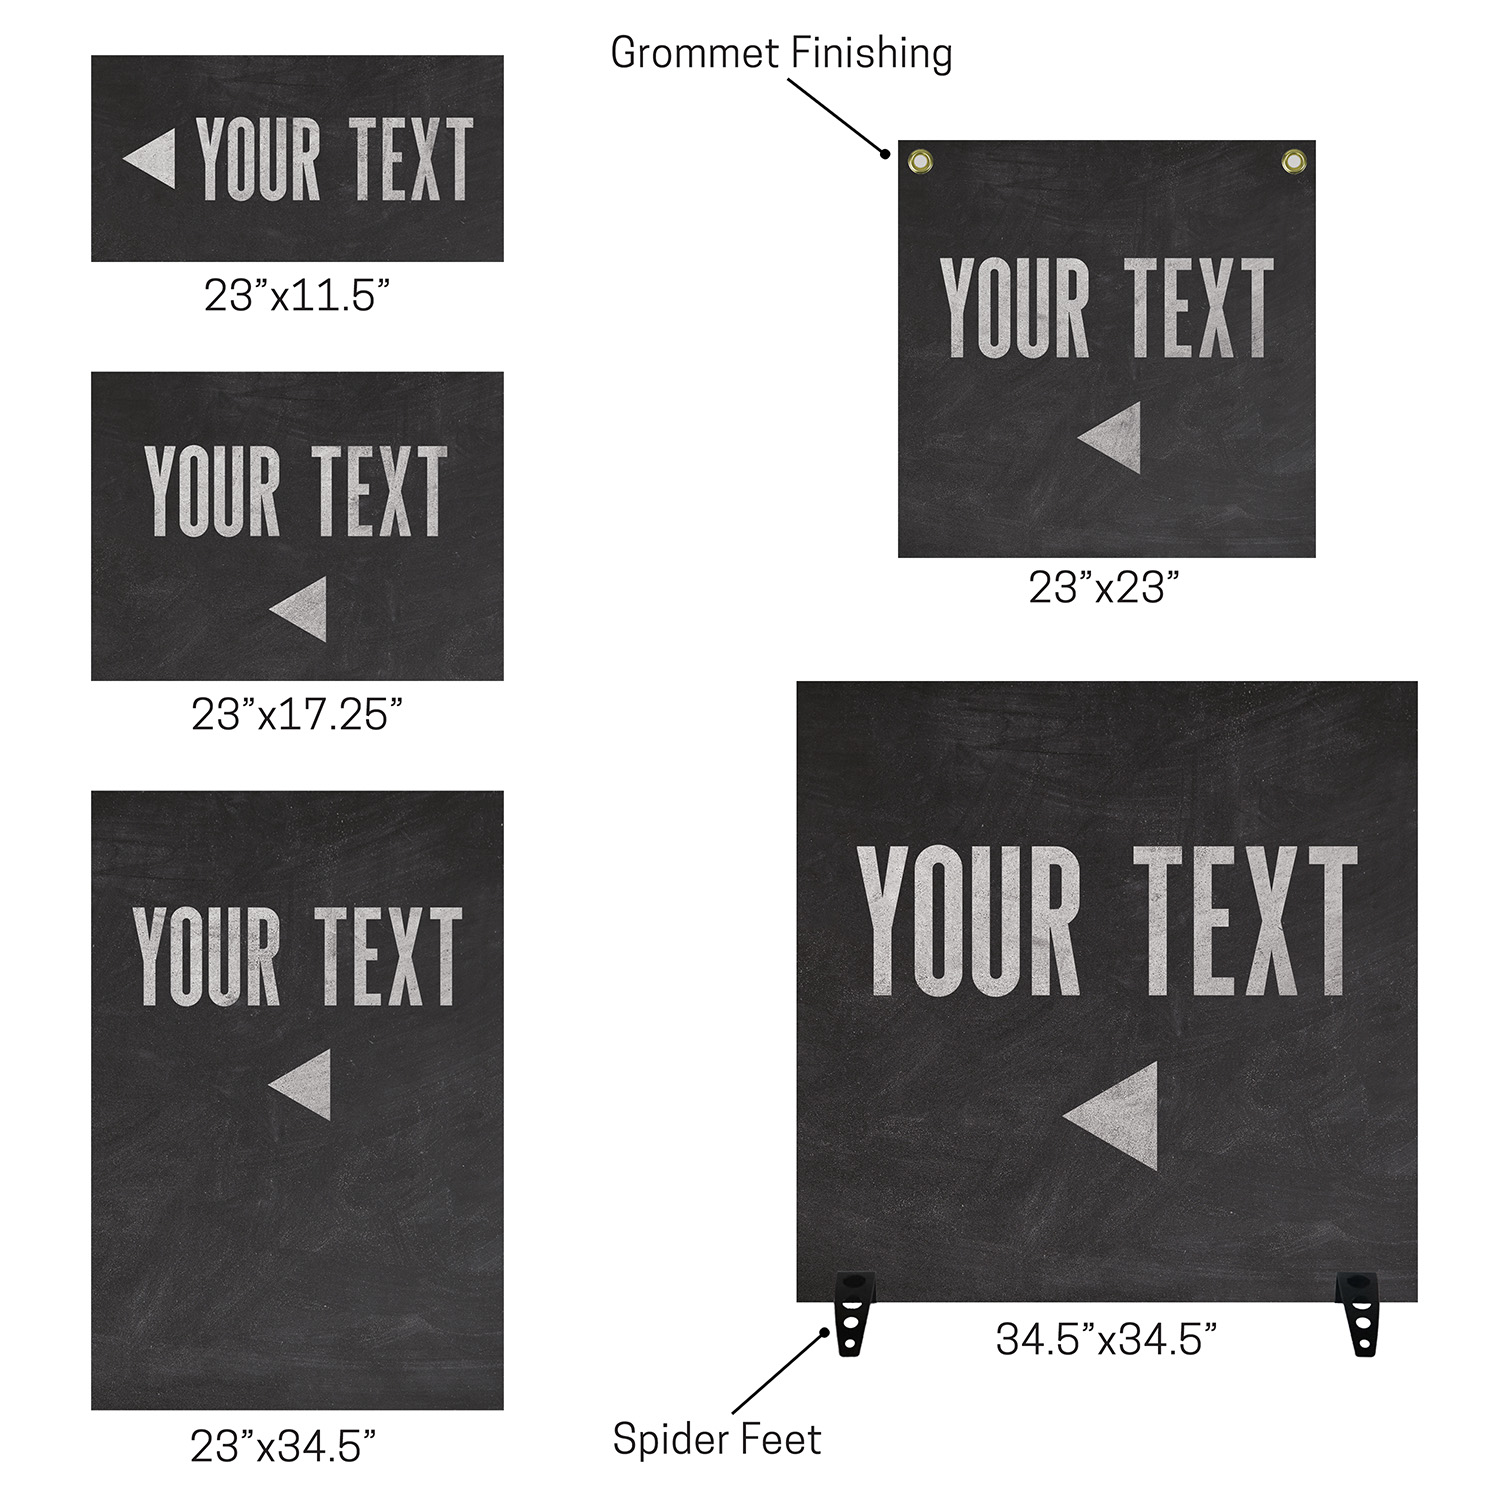 Rigid Signs, Colorful Lights Products, Colorful Lights Your Text, 34.5 x 34.5 2